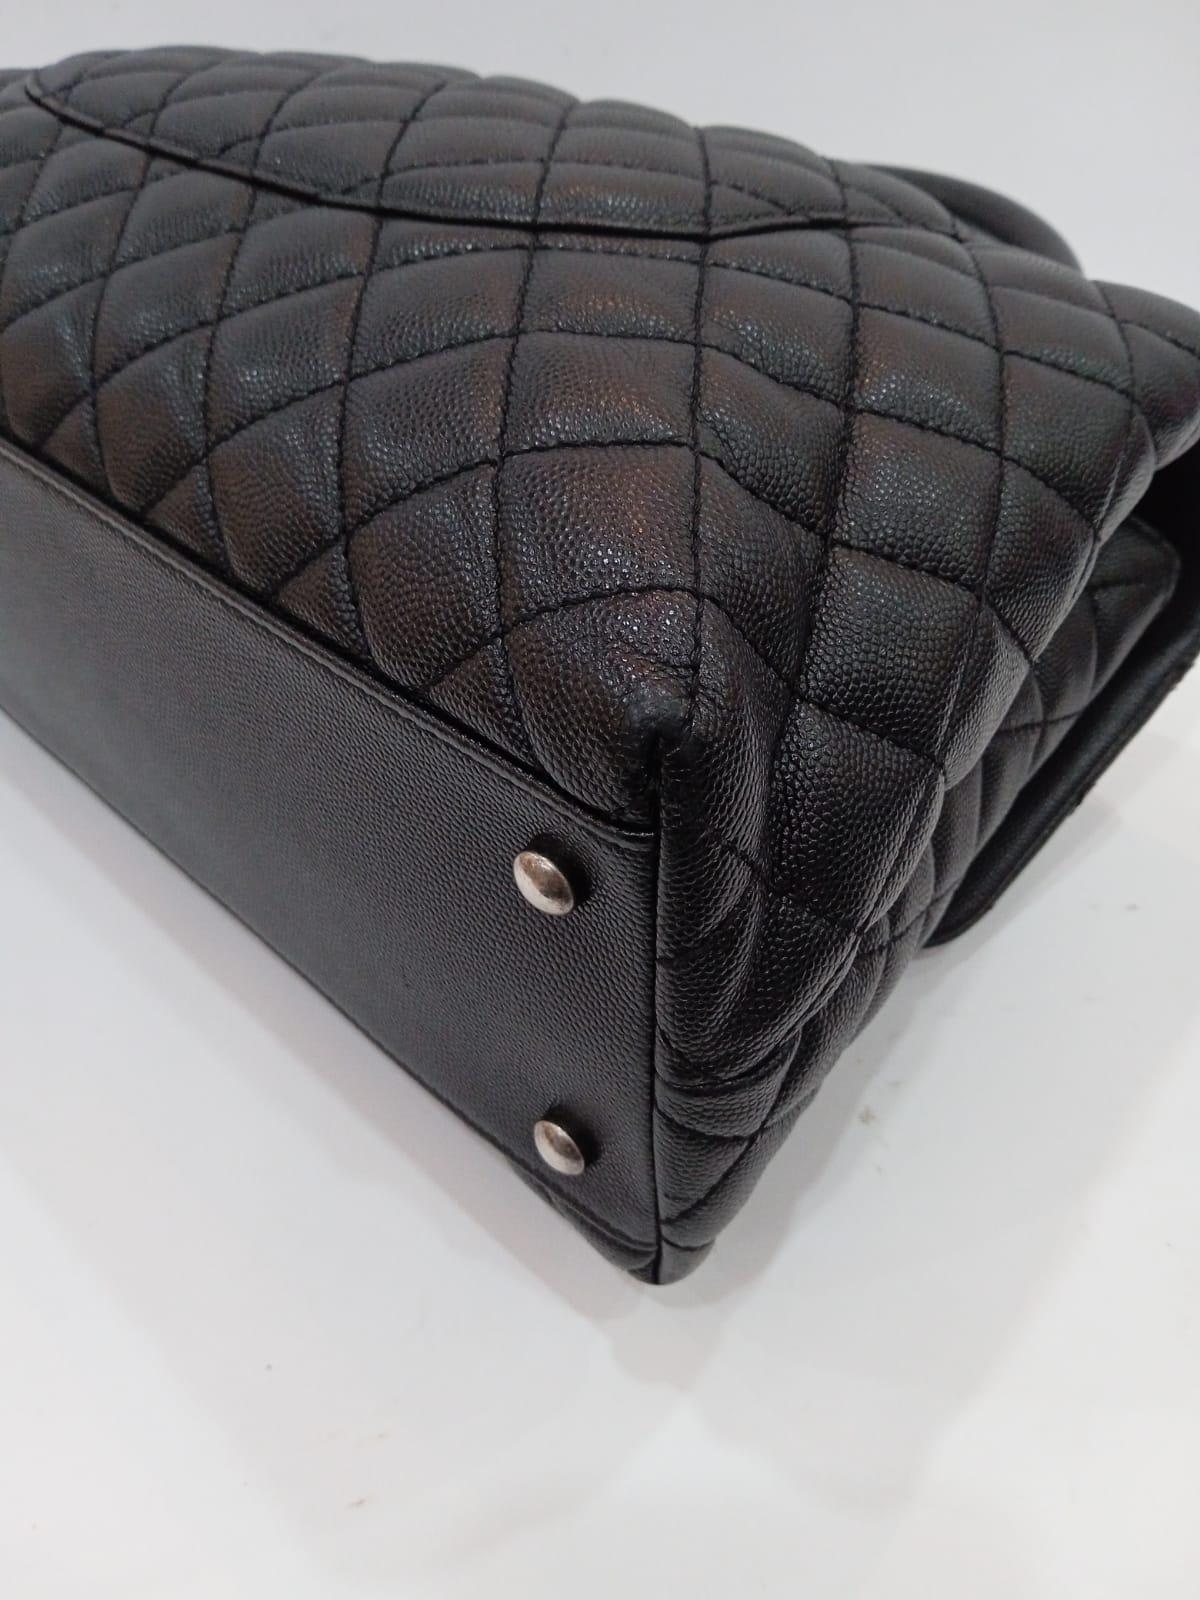 Chanel Black Caviar Quilted Large Coco Handle SHW Bag 4